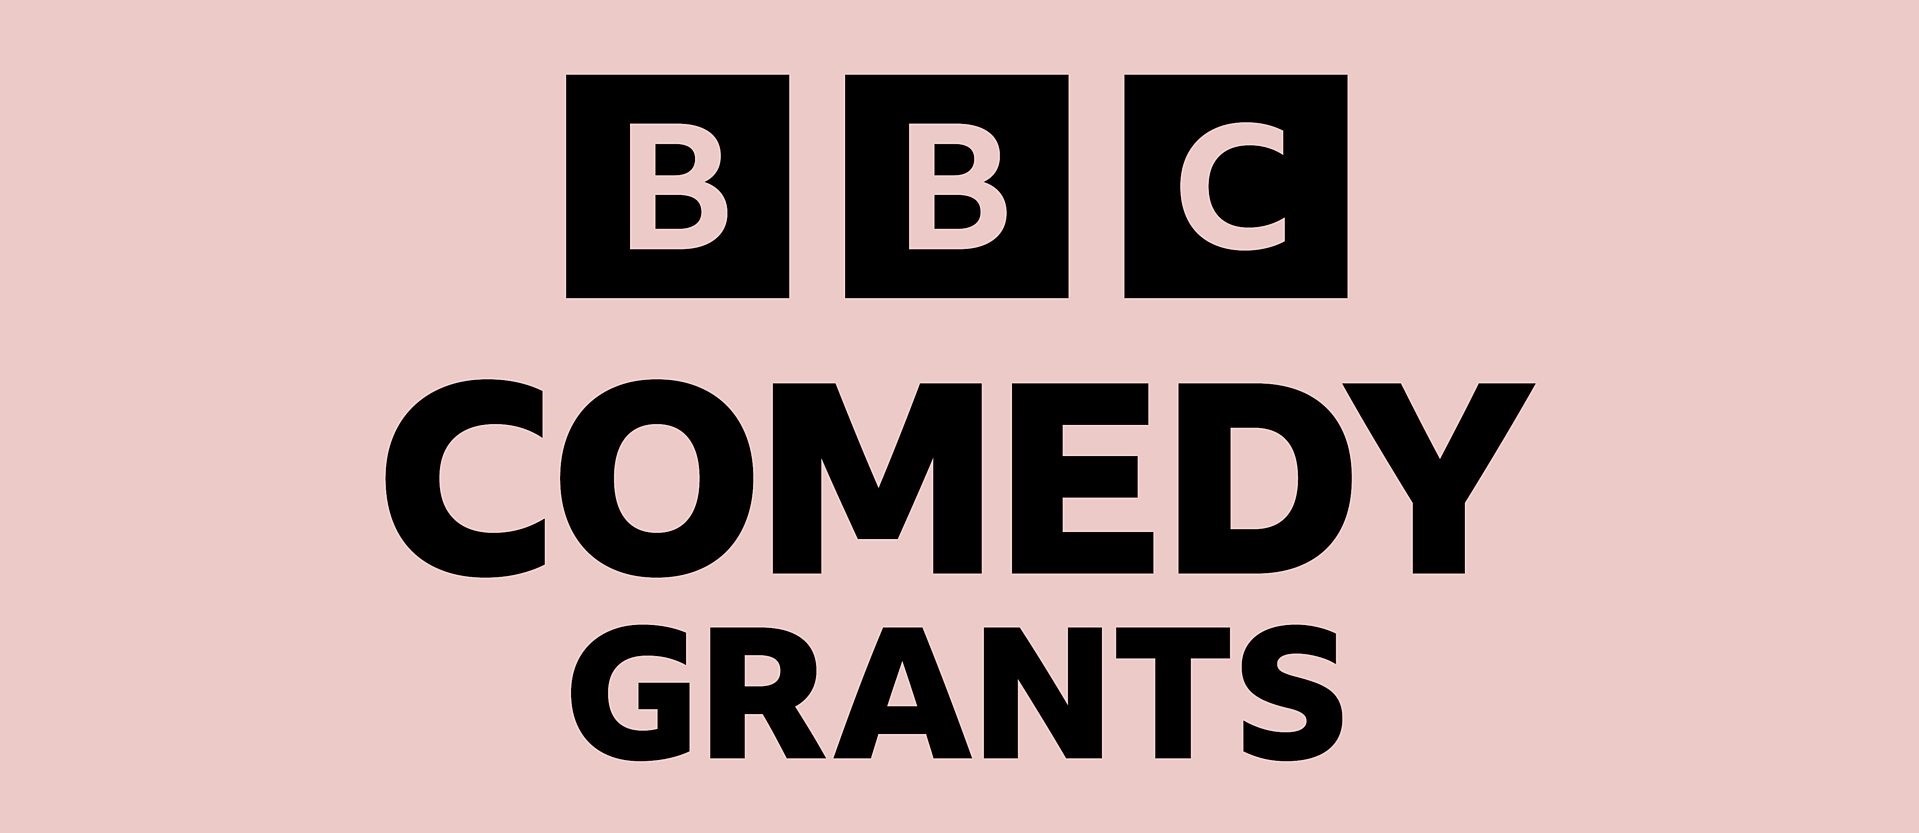 Two North East organisations awarded BBC Comedy grants